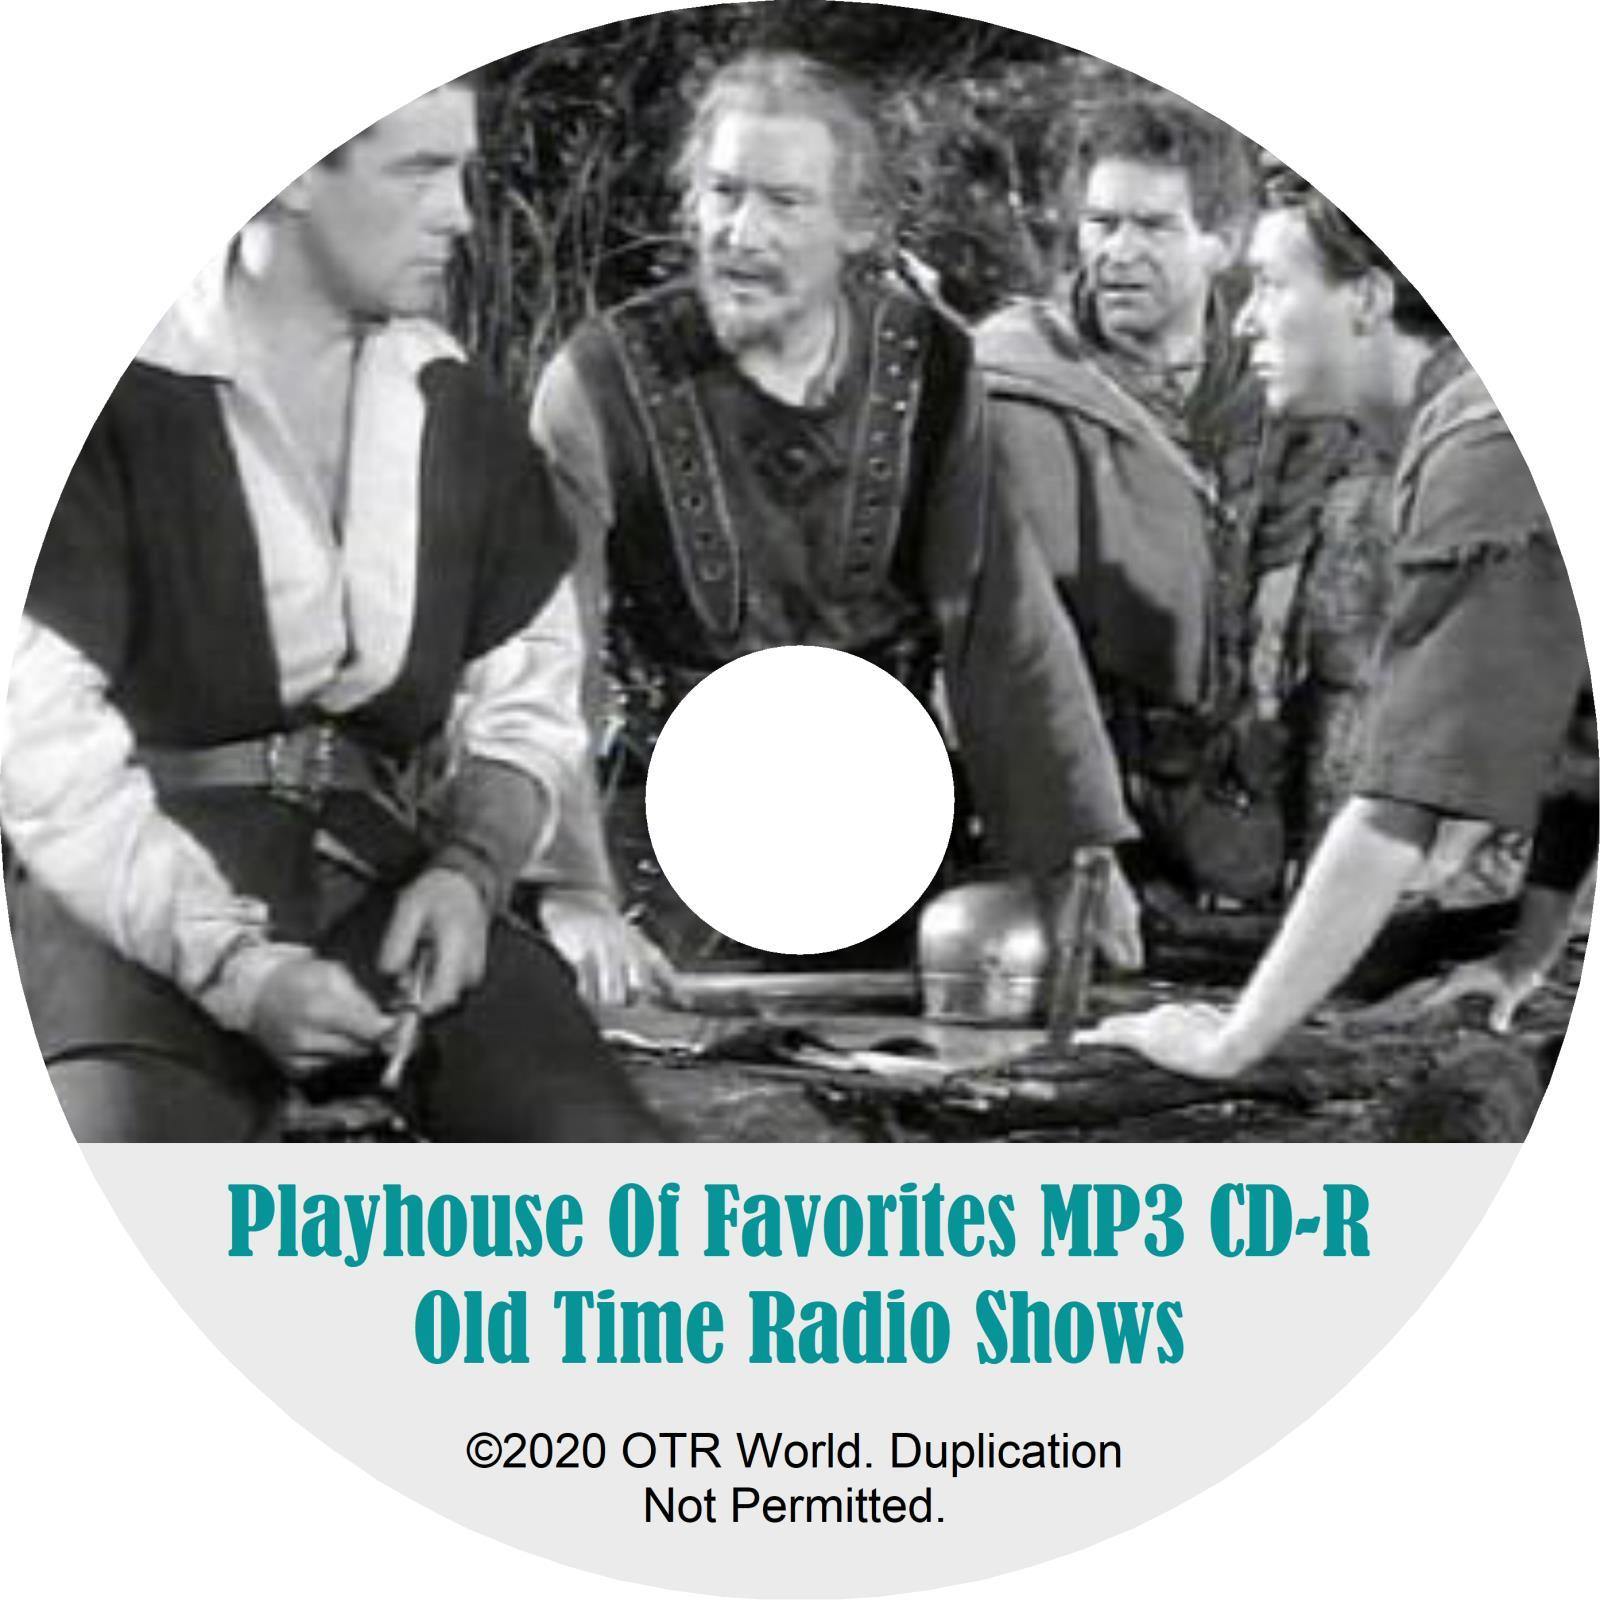 Playhouse Of Favorites OTR Old Time Radio Shows MP3 On CD 2 Episodes - OTR World